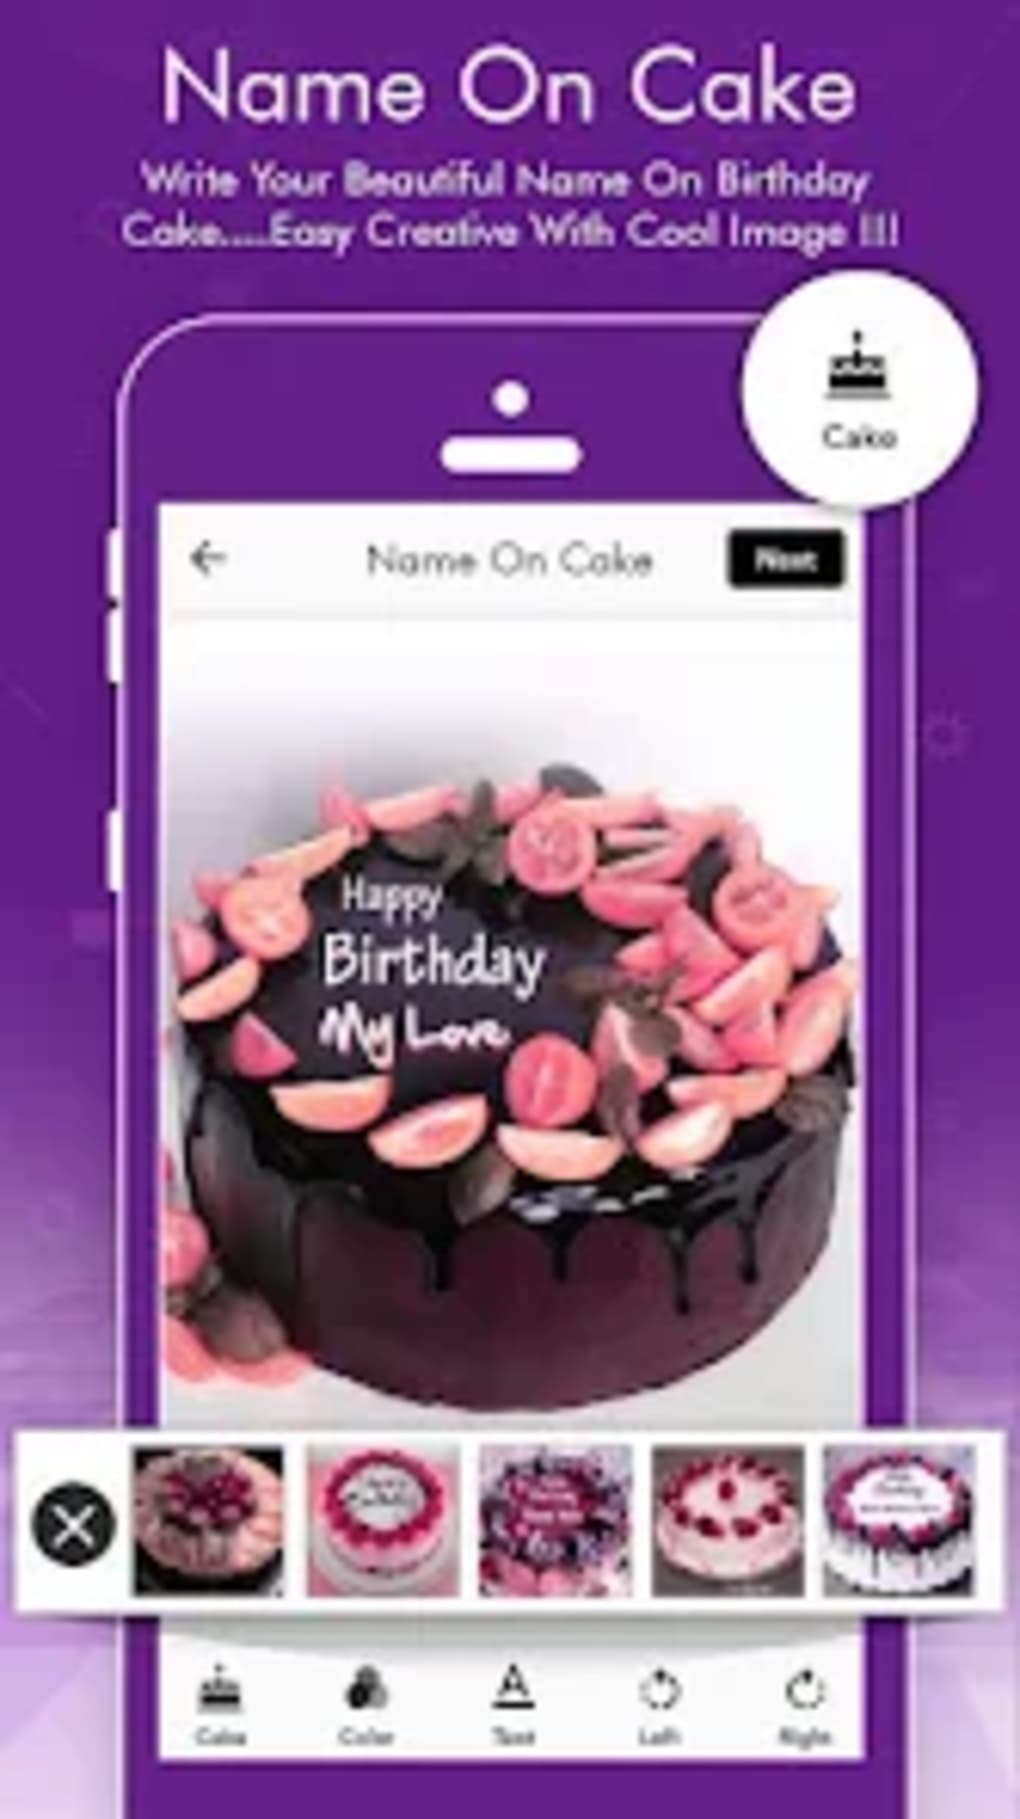 Name on Birthday Cake - Android App + Facebook and Admob Integration by  enerjik_tech